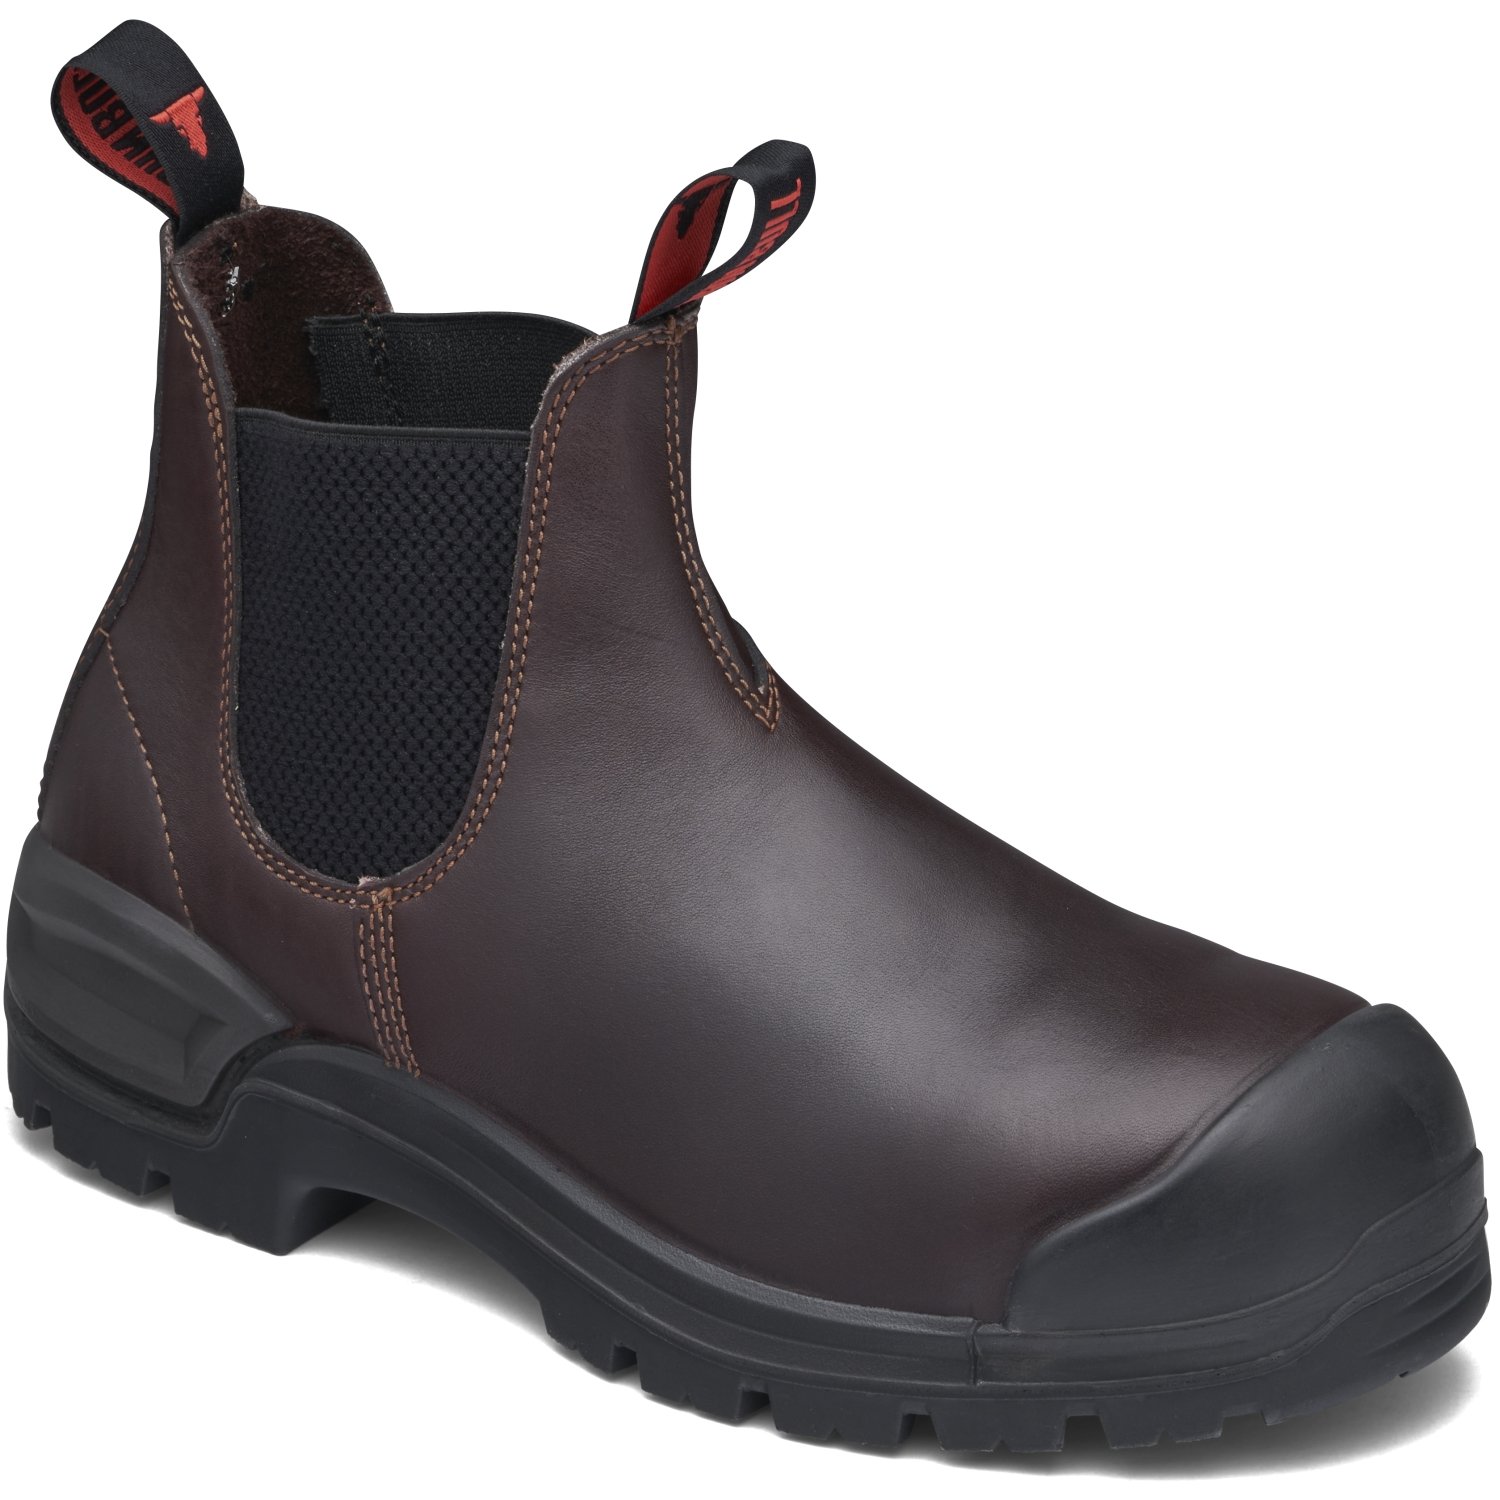 John Bull Cougar 2.0 Slip On Safety Boot With Scuff Cap Oxblood